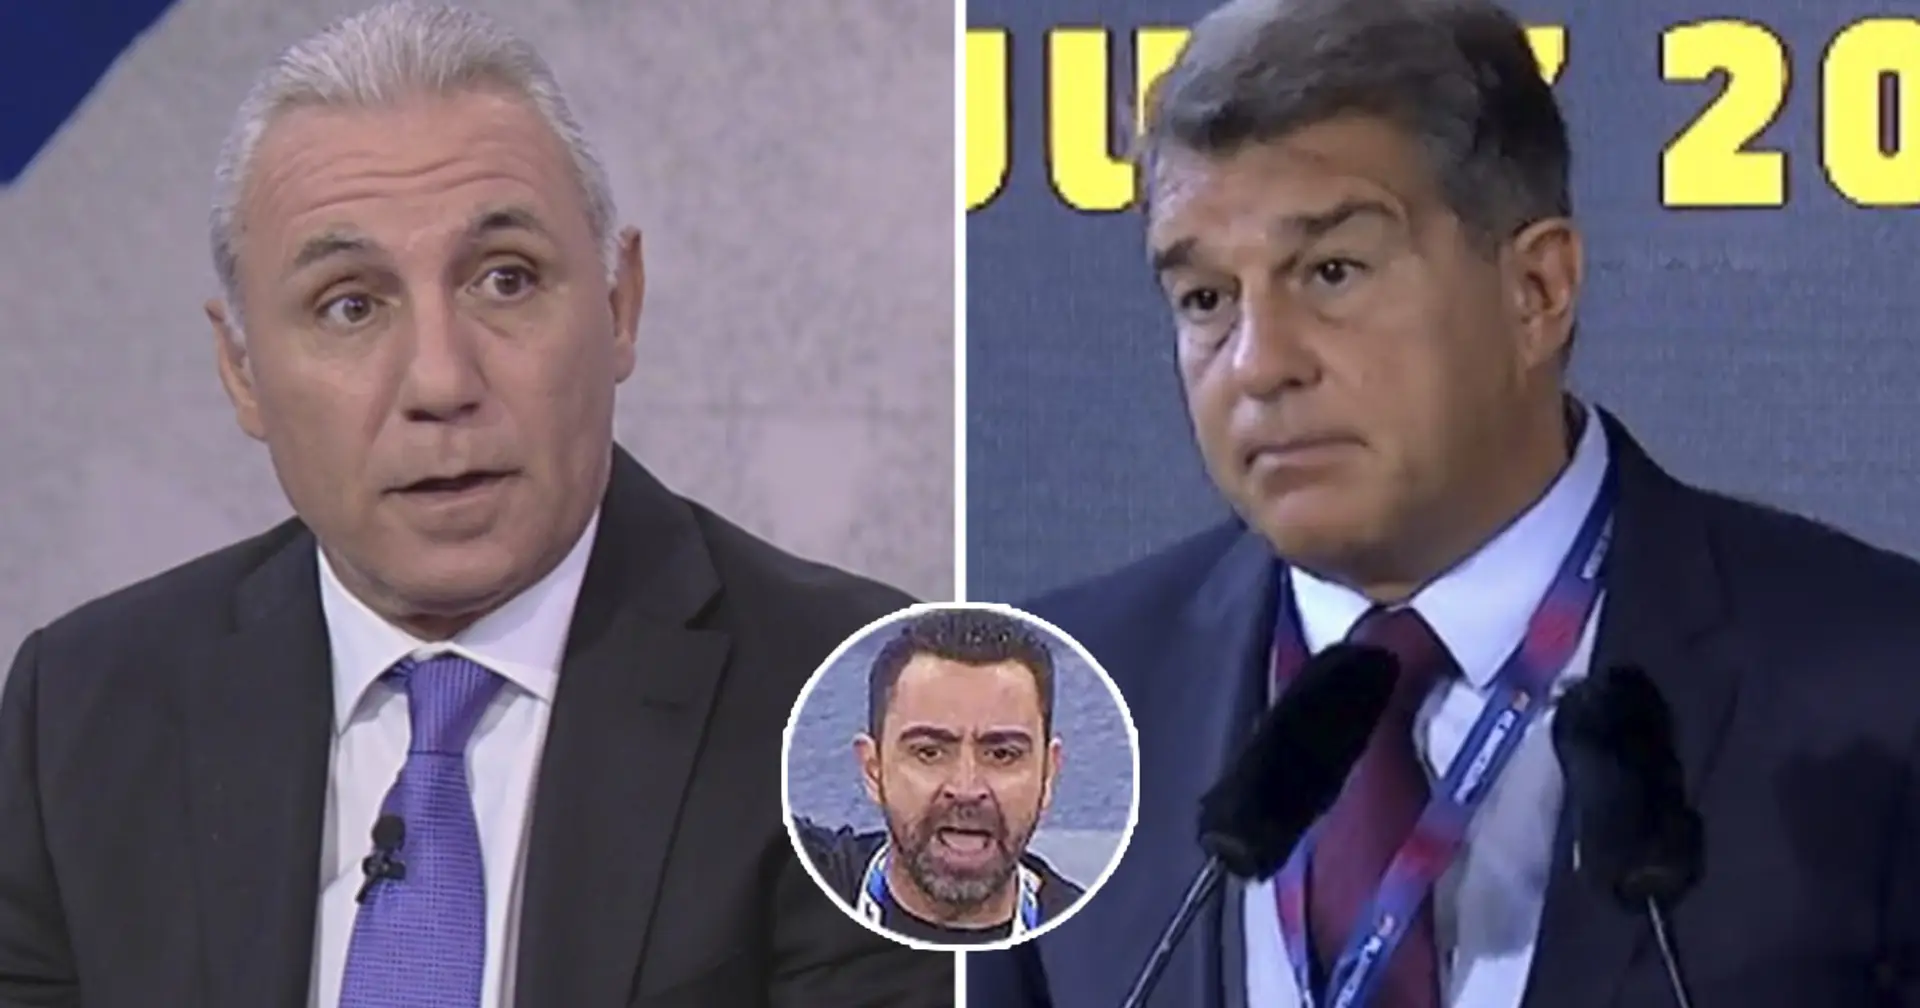 'Does he want to kick another legend out?': Club legend Stoichkov slams Laporta for Xavi treatment